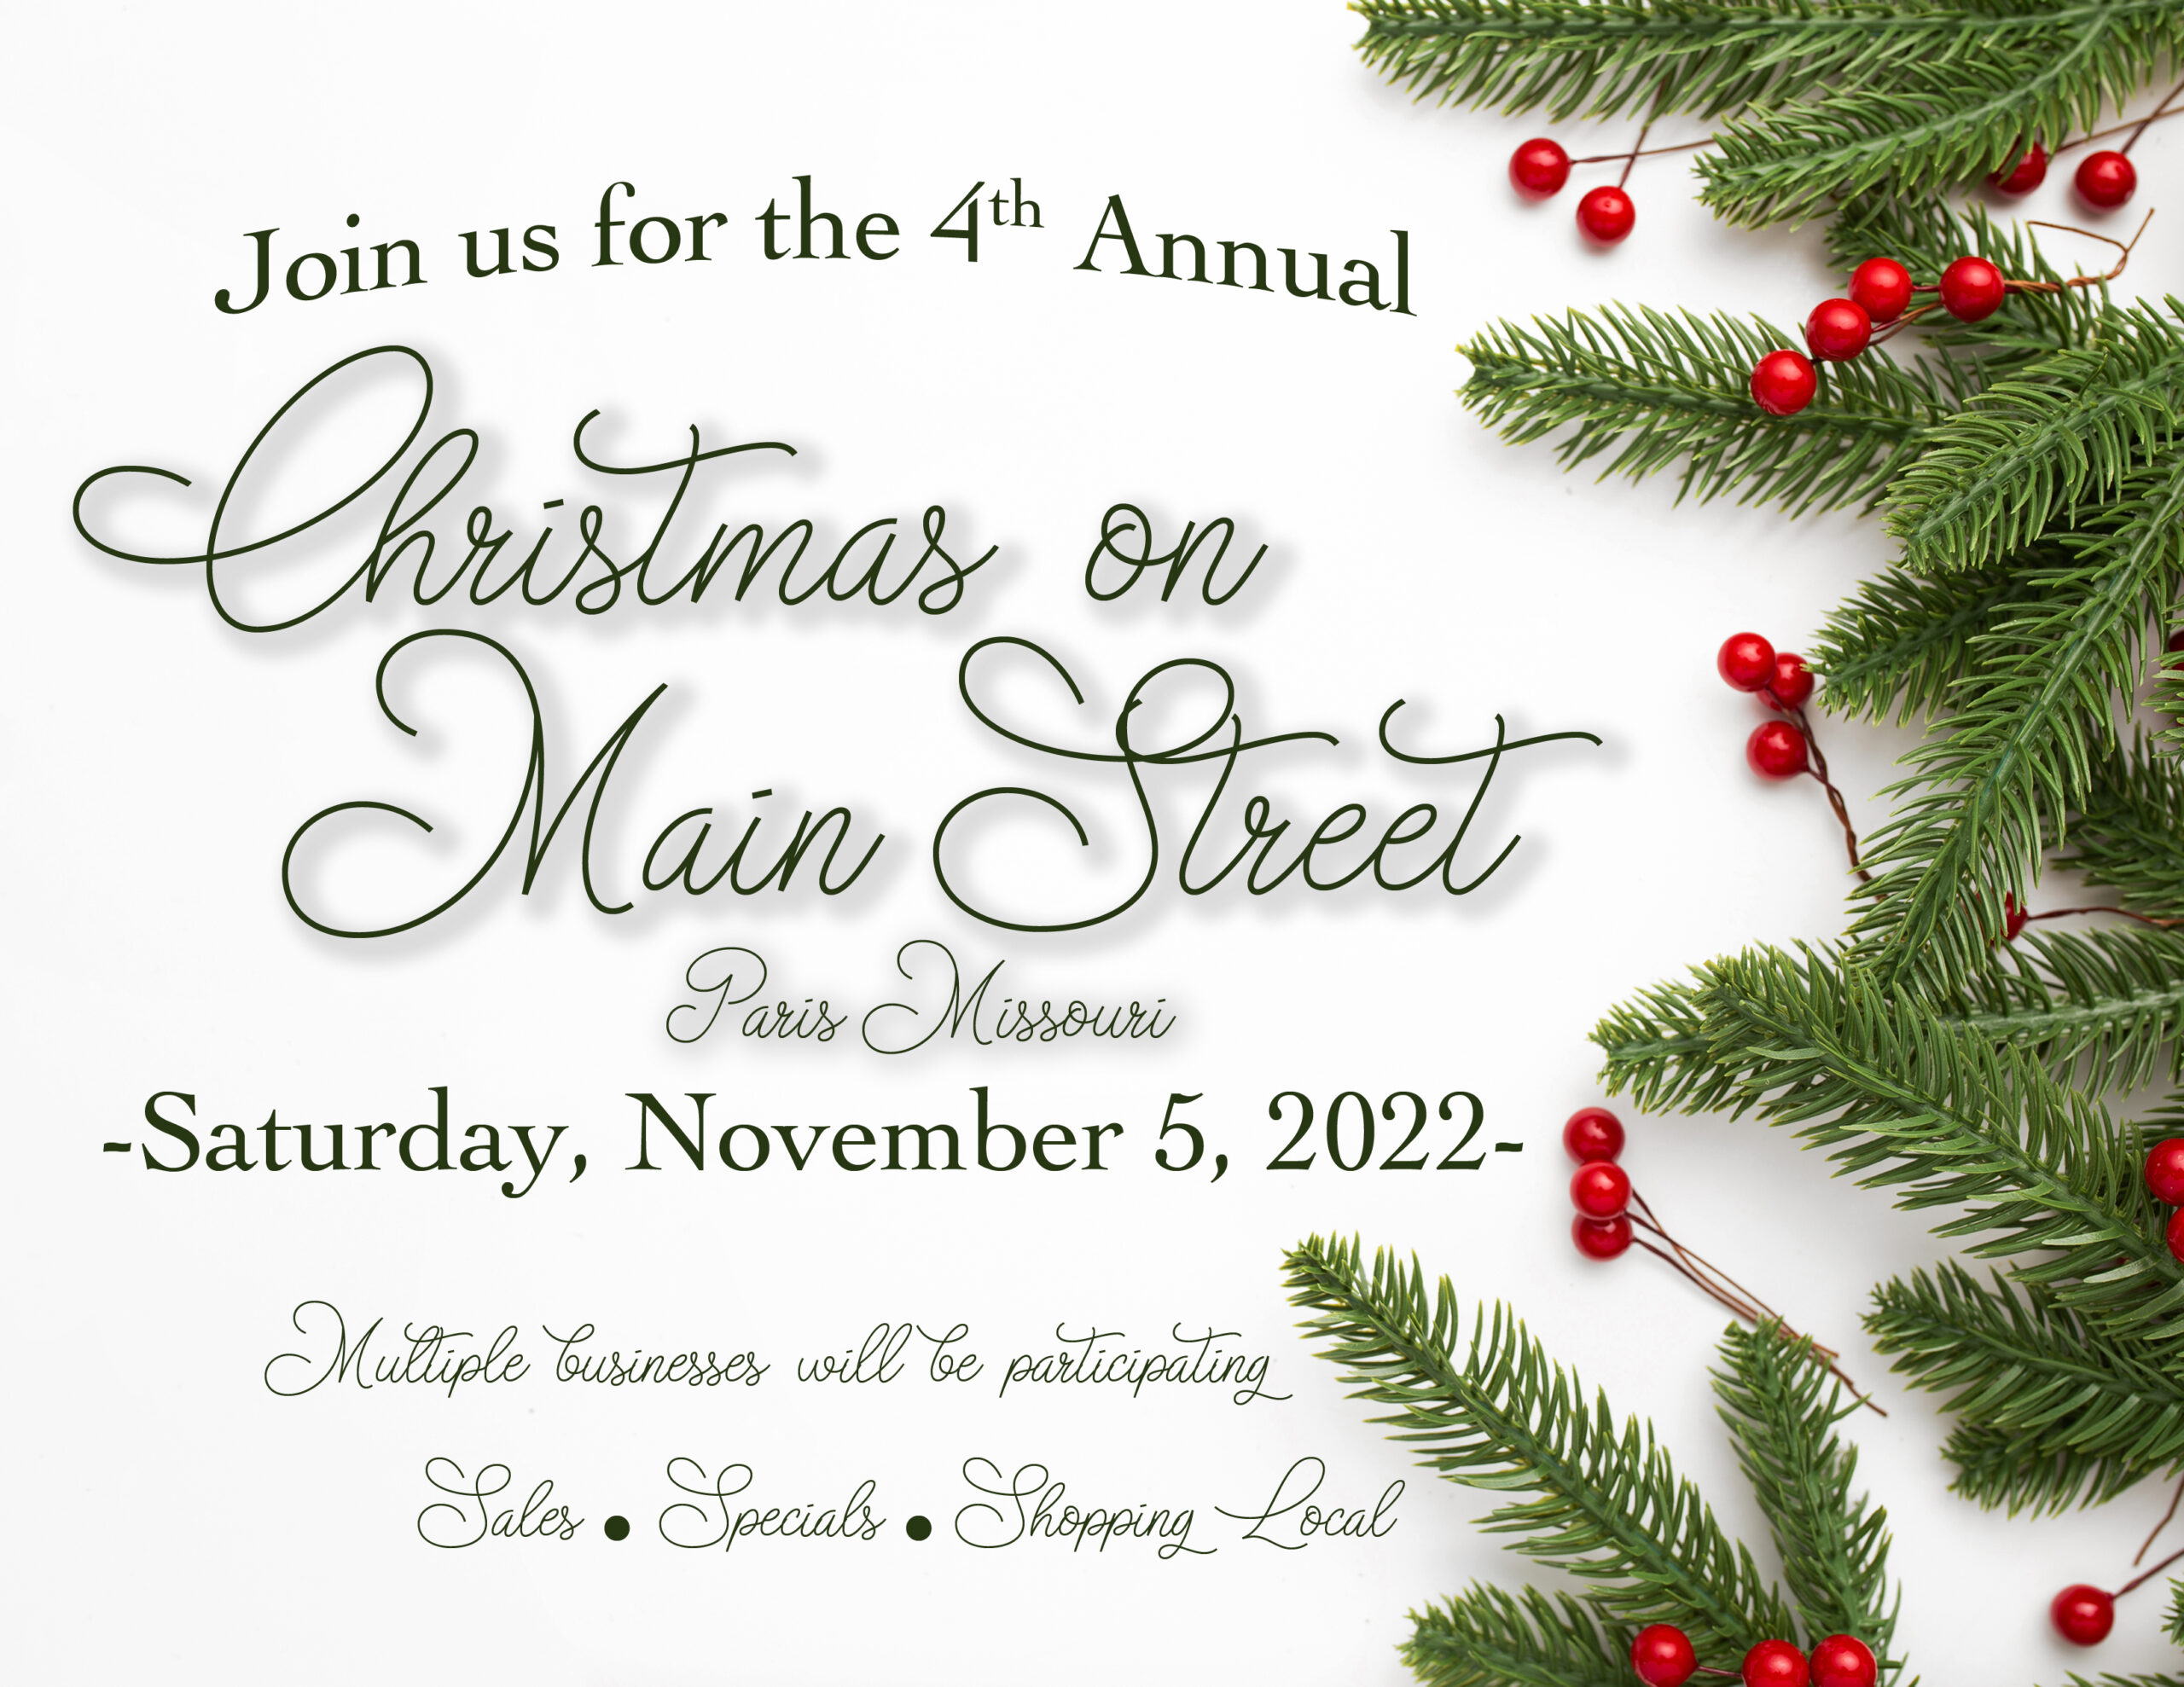 Christmas on Main Street | Paris Area Chamber of Commerce